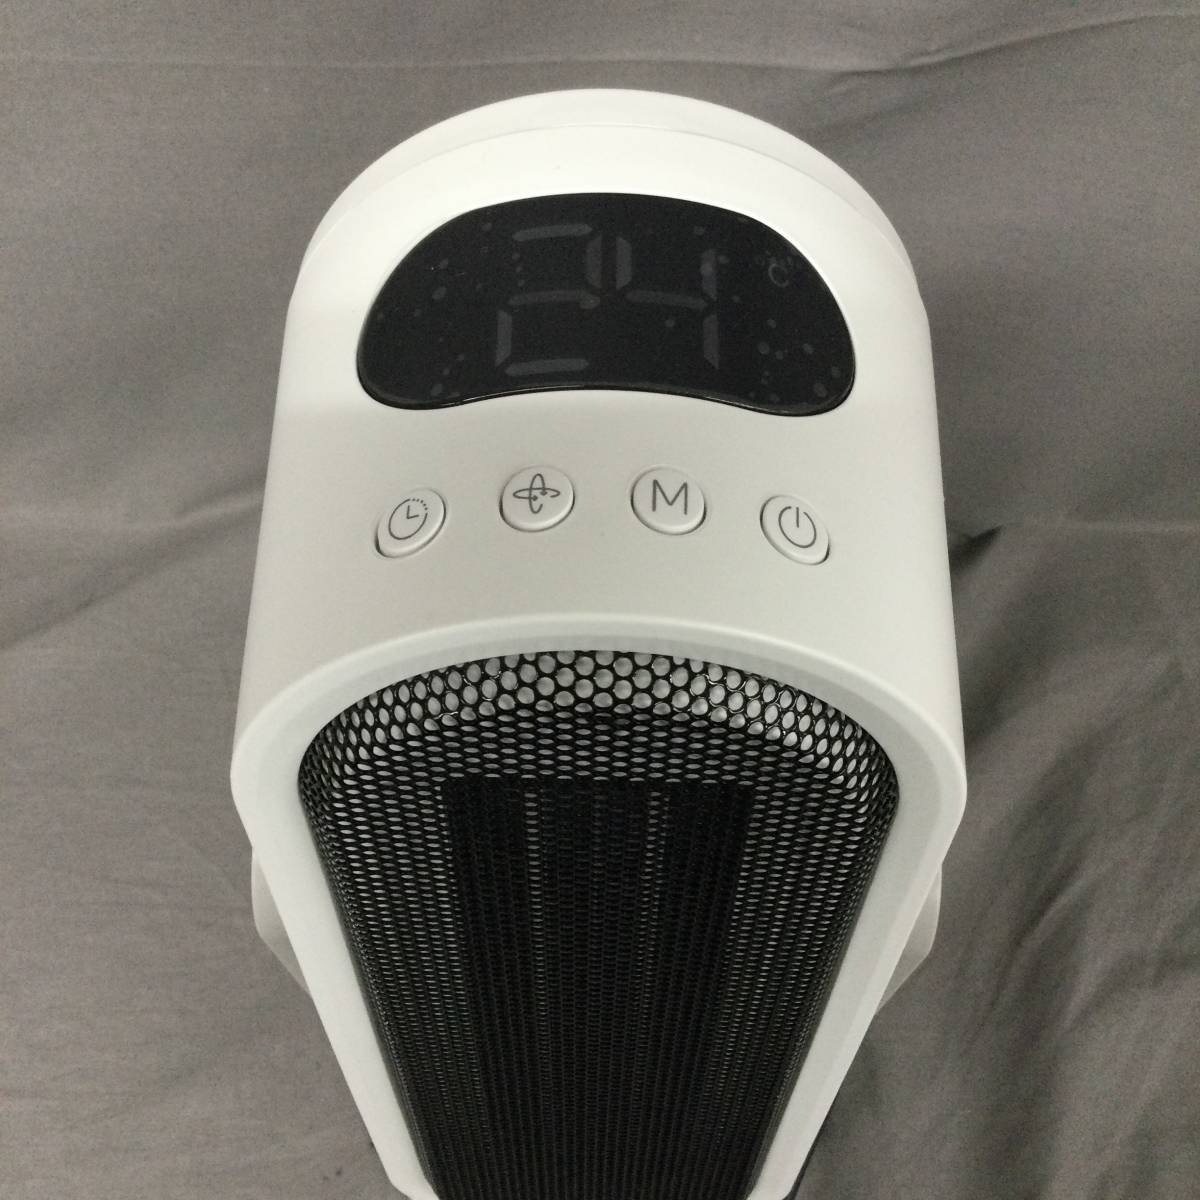 050109 254425 Shenzhen Carolx Technology ceramic fan heater electric heater H1 white group color remote control attaching box attaching electrification OK